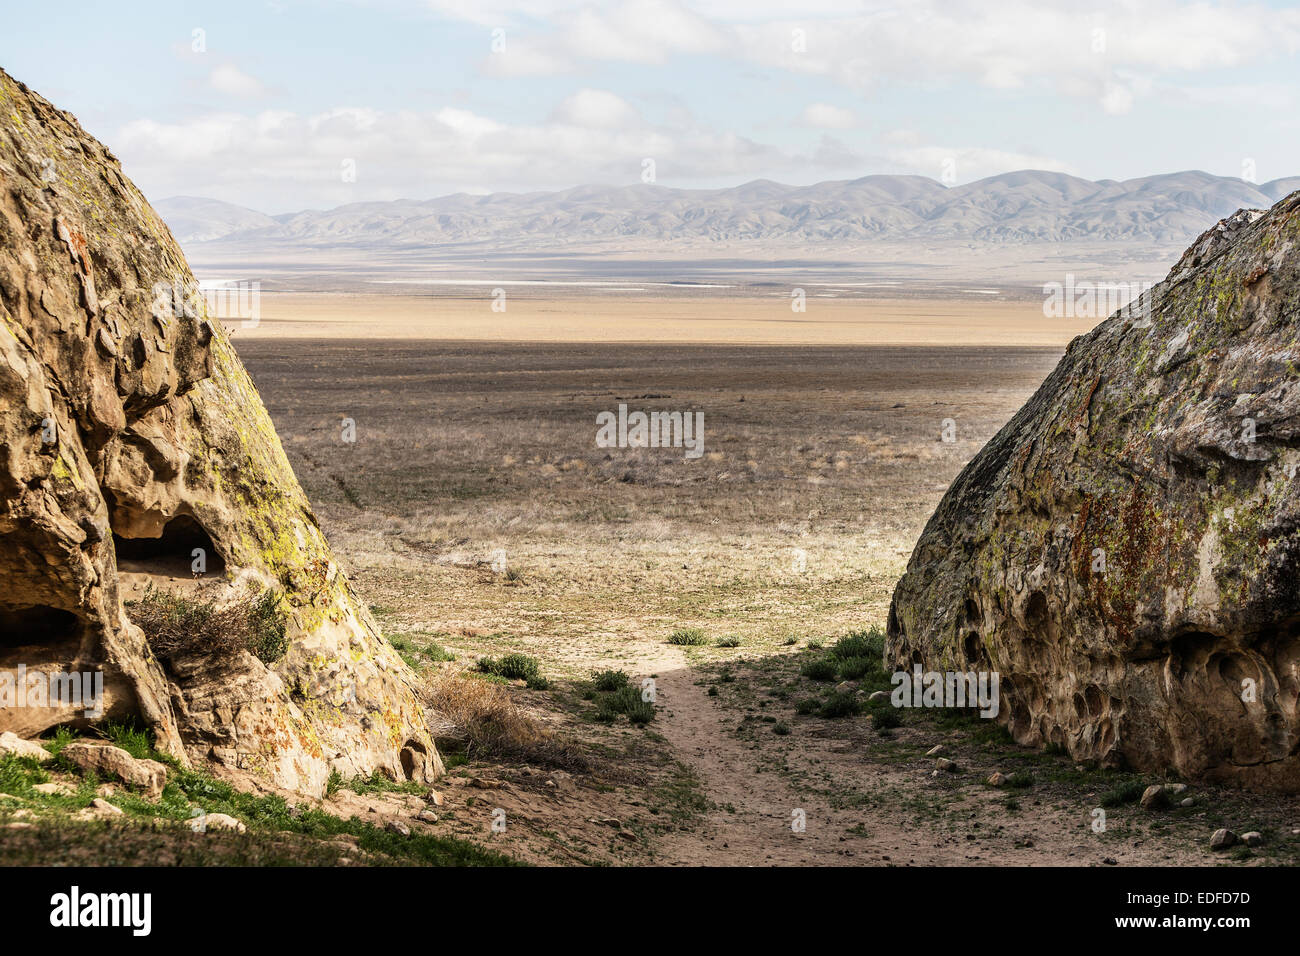 Looking out at the Carrizo Plain. Stock Photo